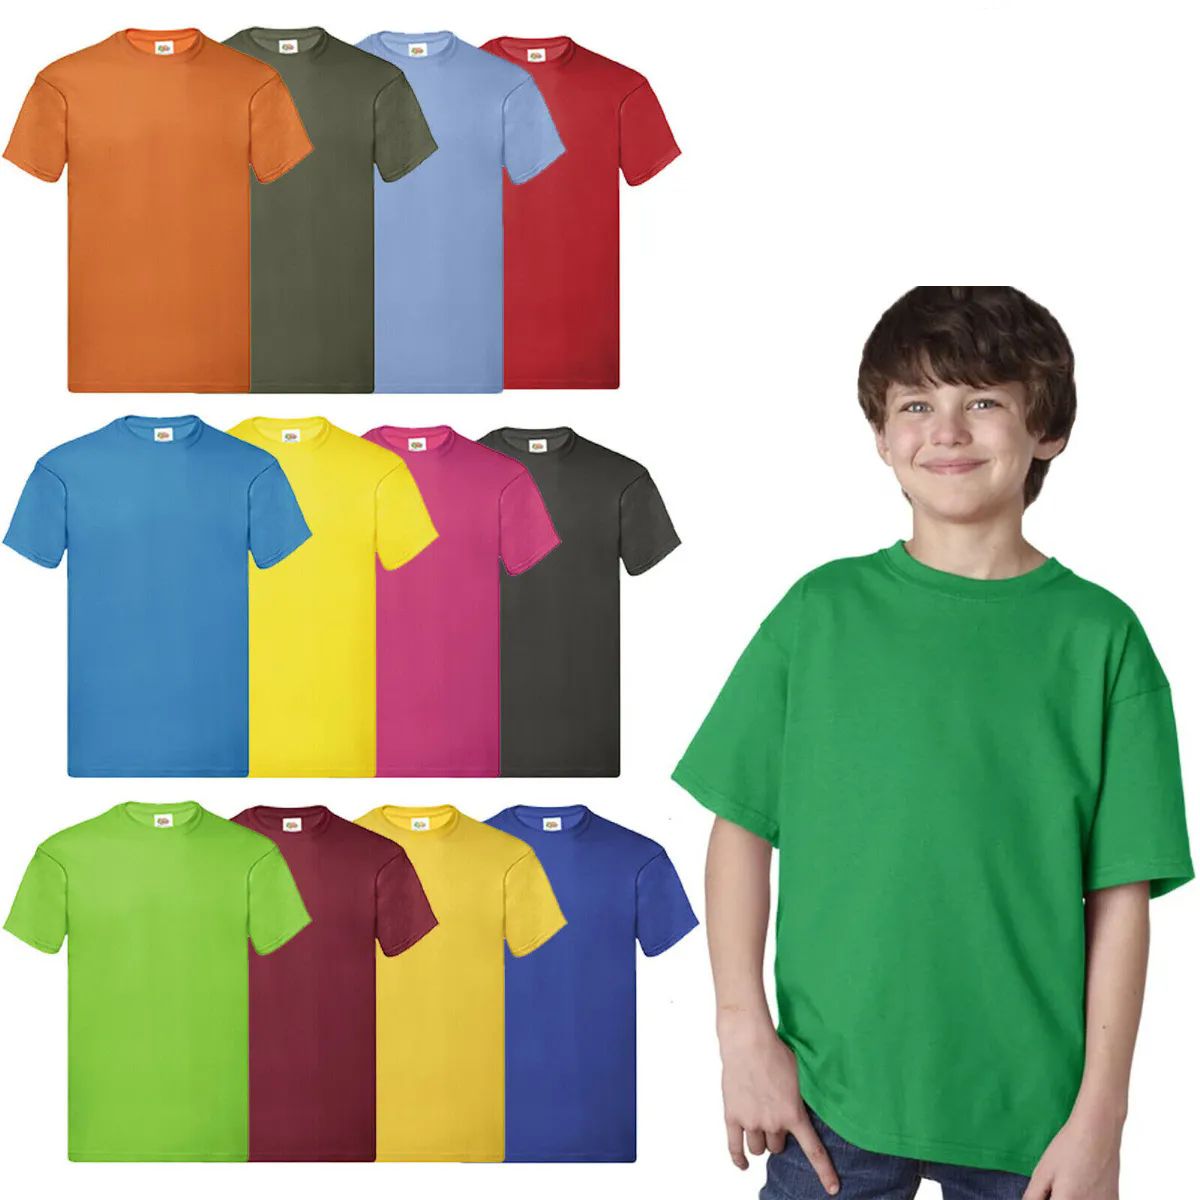 432 Pieces of Billion Hats Kids Youth Cotton Assorted Colors T Shirts Size XL